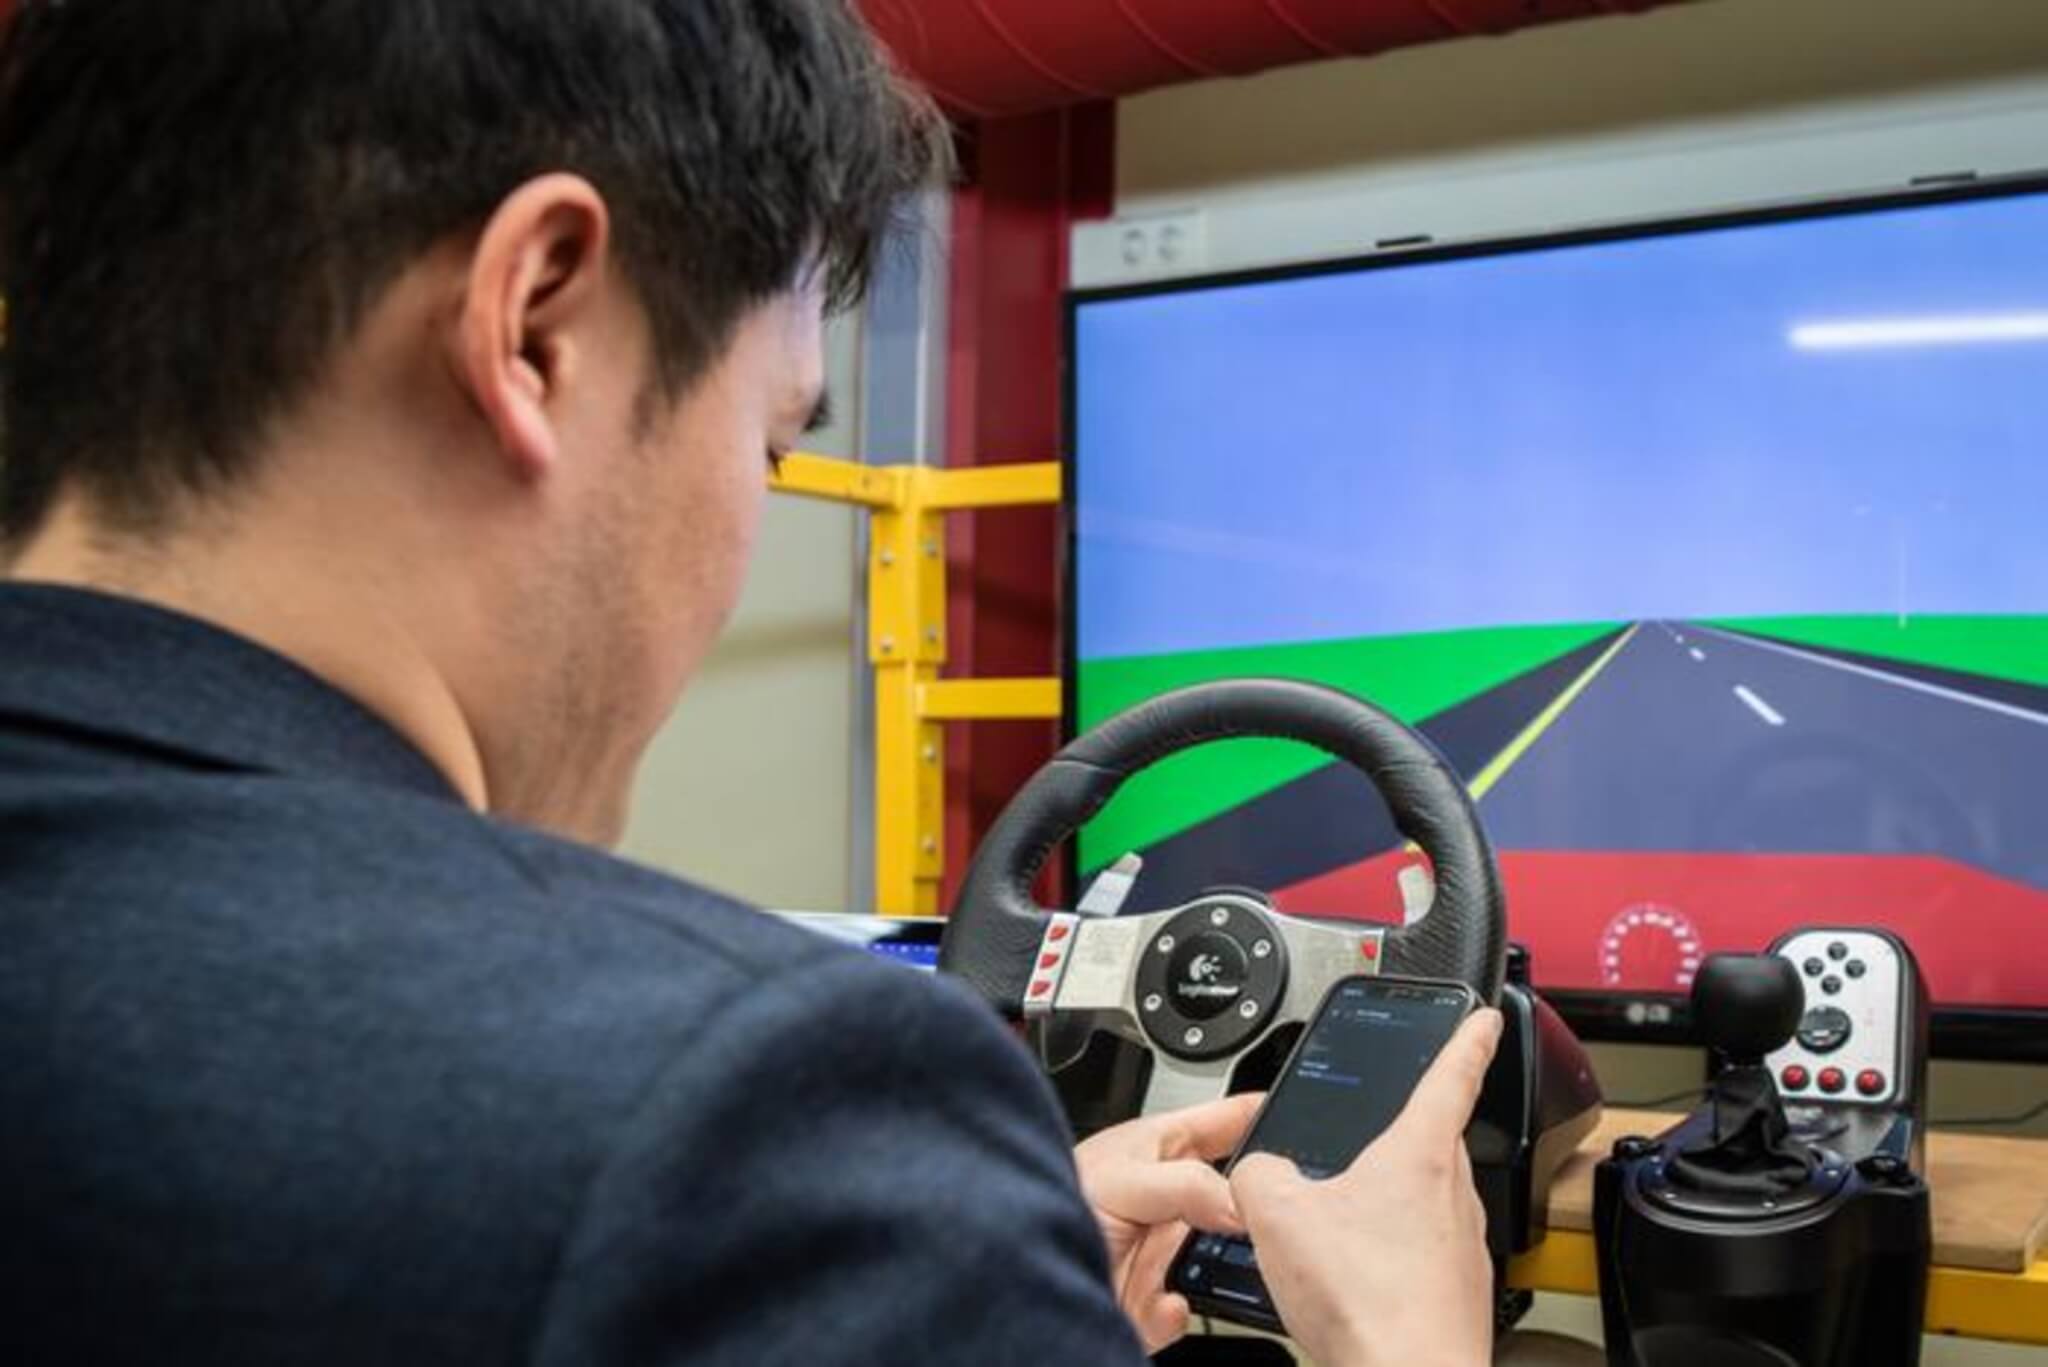 Lead study author, Dr. Neng Zhang, demonstrates social media use in the automated vehicle simulator